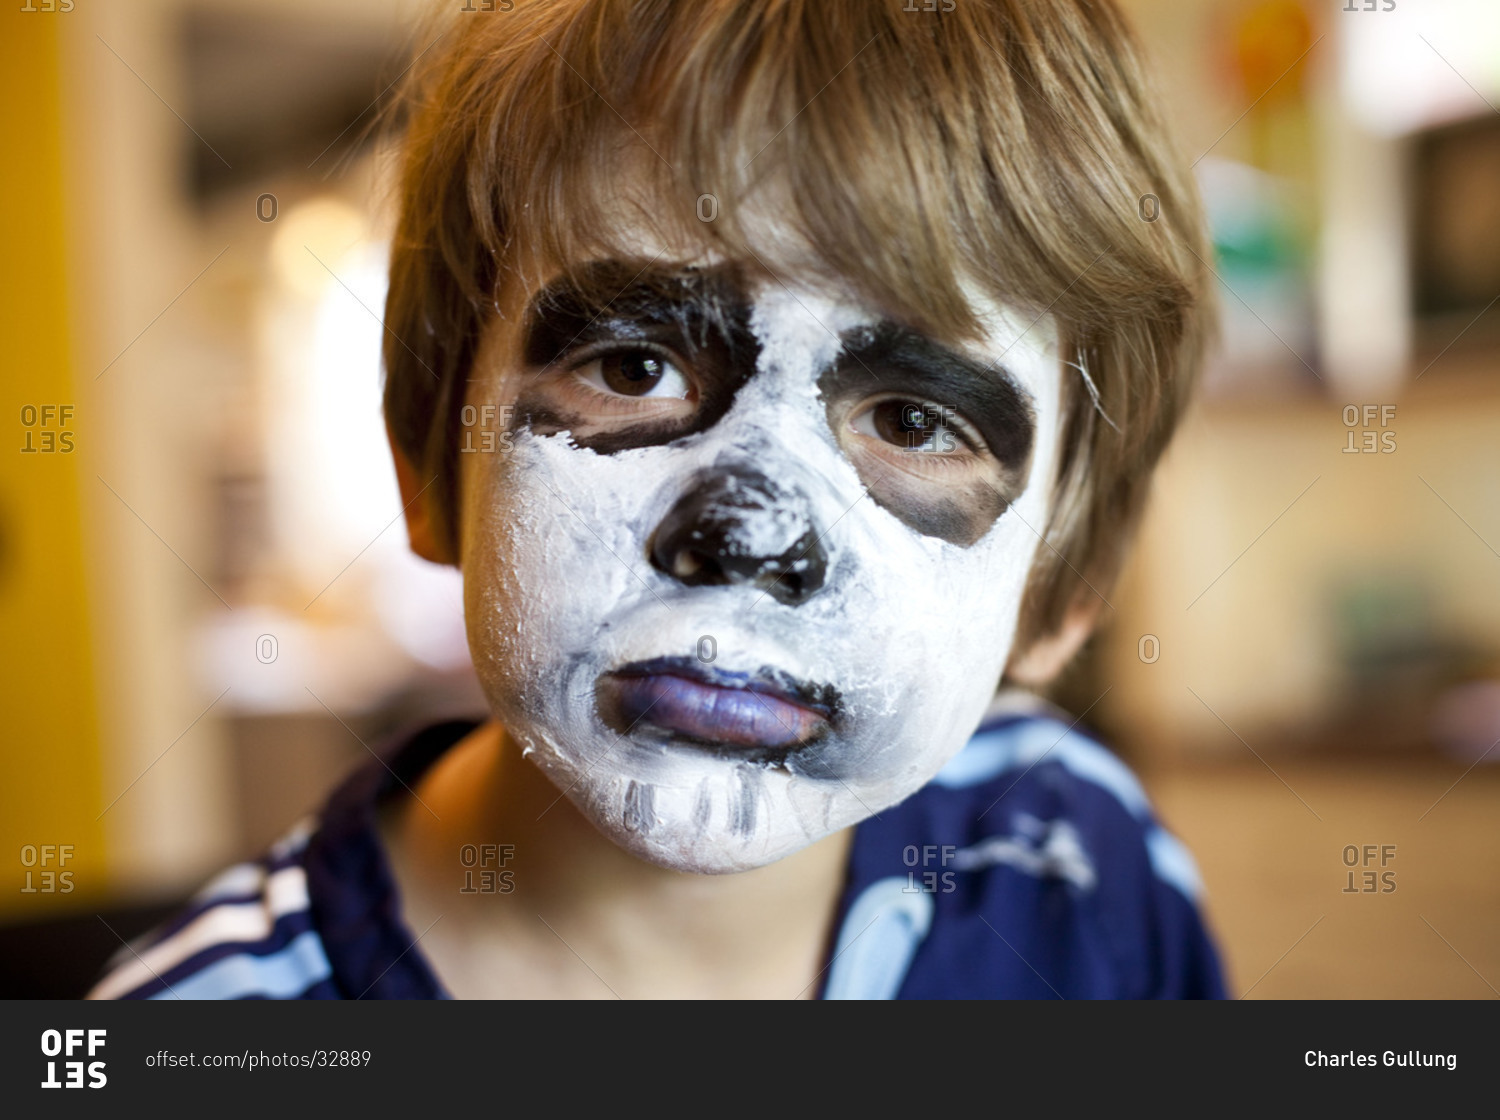 Portrait of boy with painted face and sad eyes.